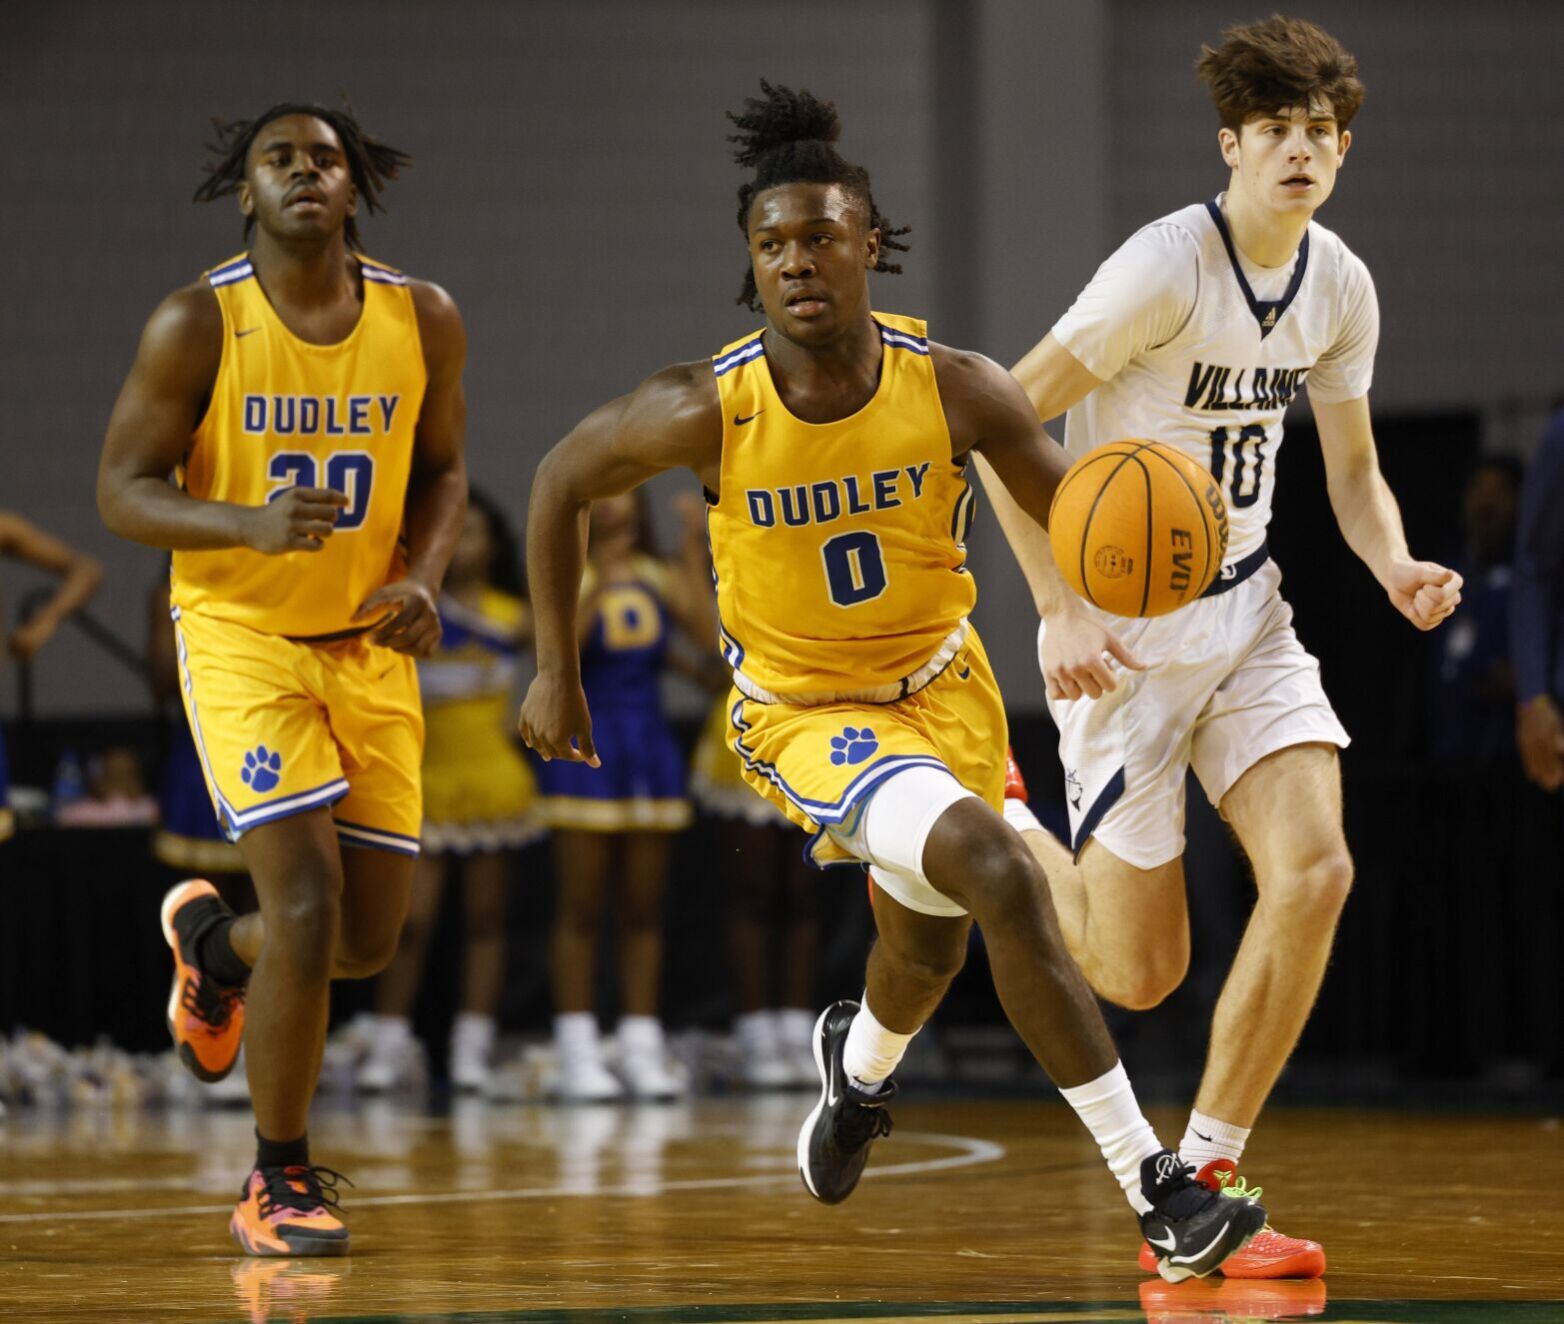 Dudley High School Basketball: Strong Roster and Depth Leading into NCHSAA 3A Playoffs